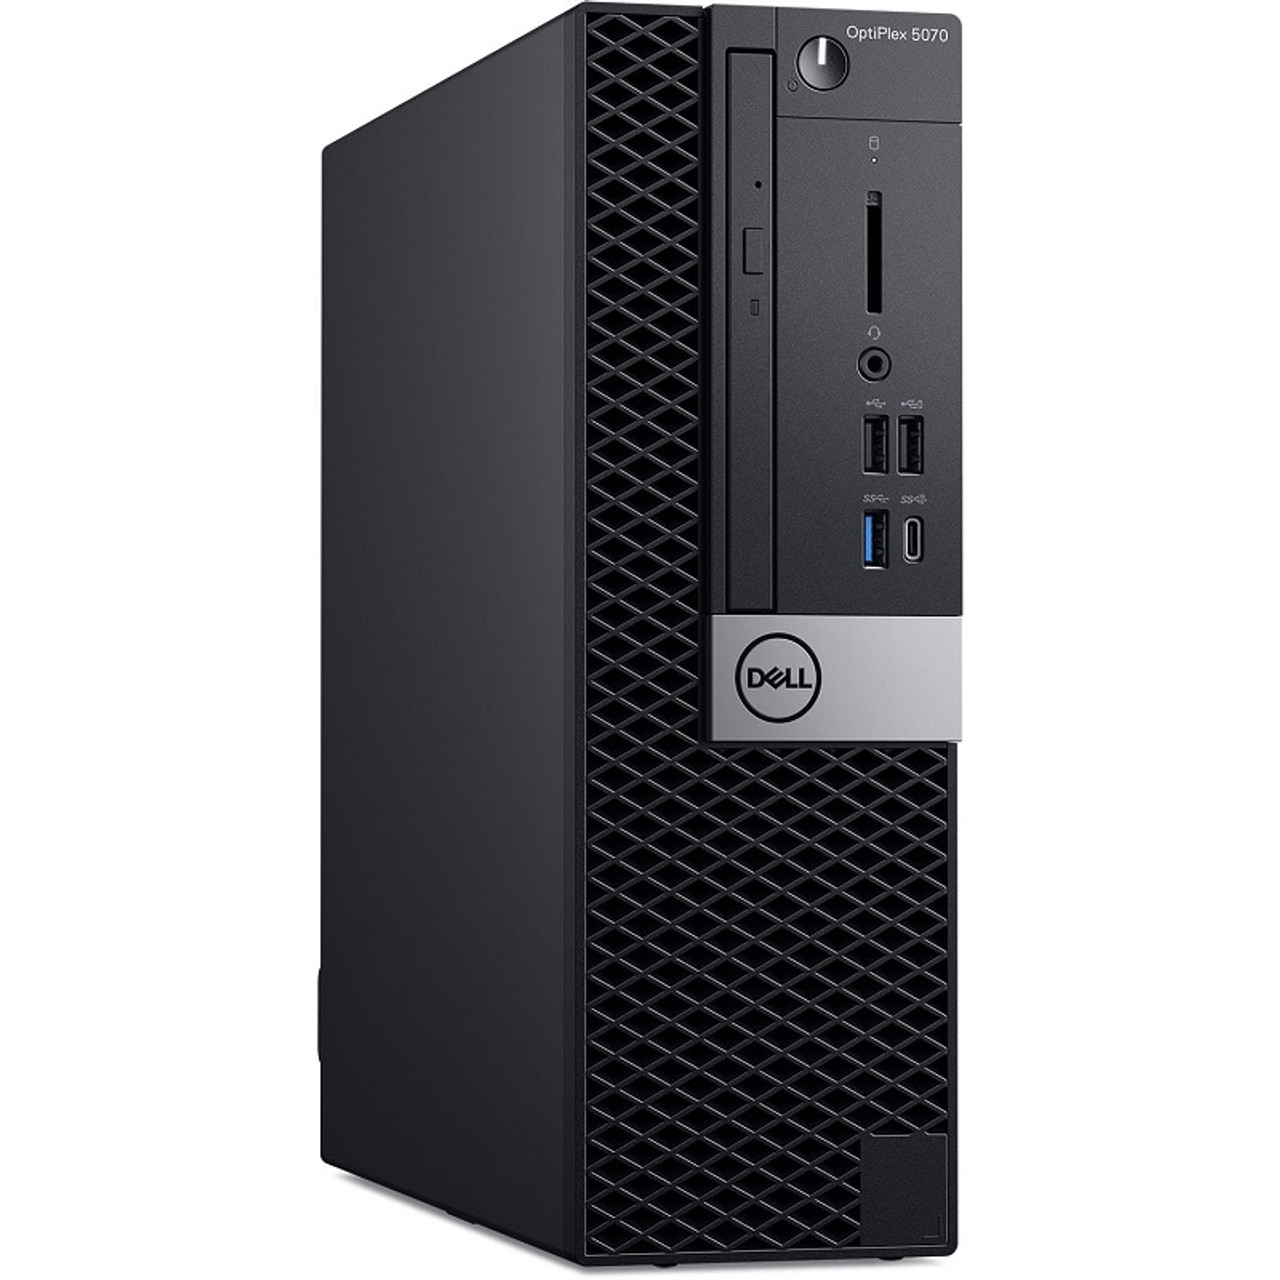 Dell OptiPlex 5070 SFF Intel Core i7-9700 4.2GHz up to 4.7GHz 8GB